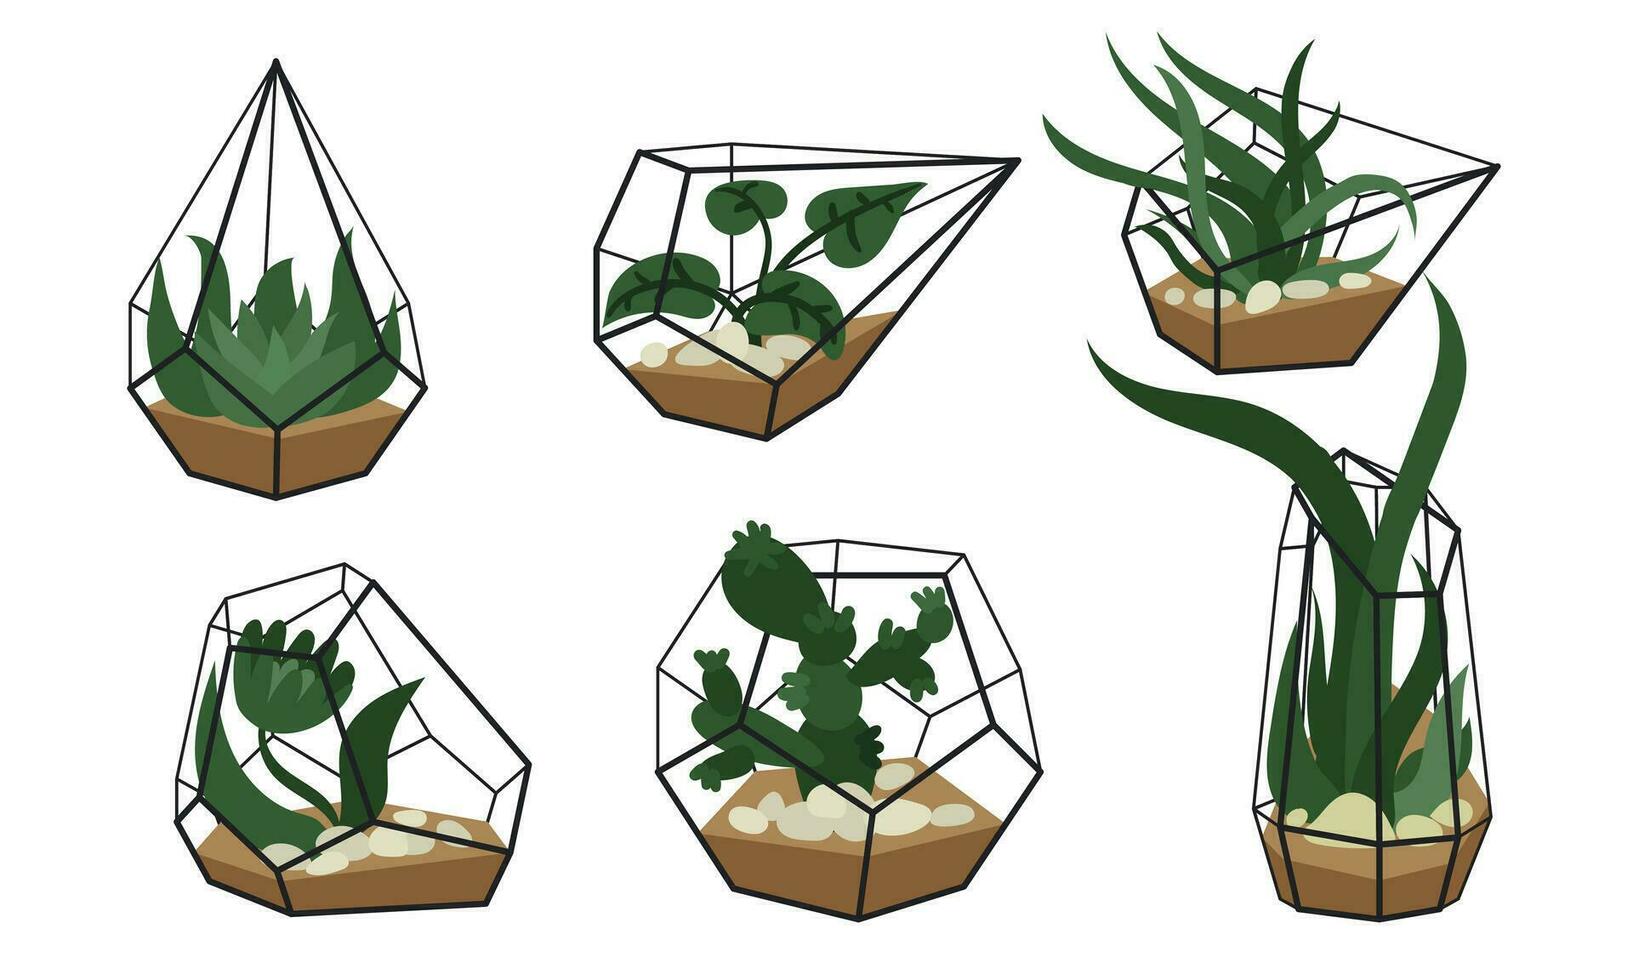 A set of beautiful florarium in cartoon style. Vector illustration of a glass florarium of various geometric shapes with succulents and cacti, aloe vera, stones highlighted on a white background